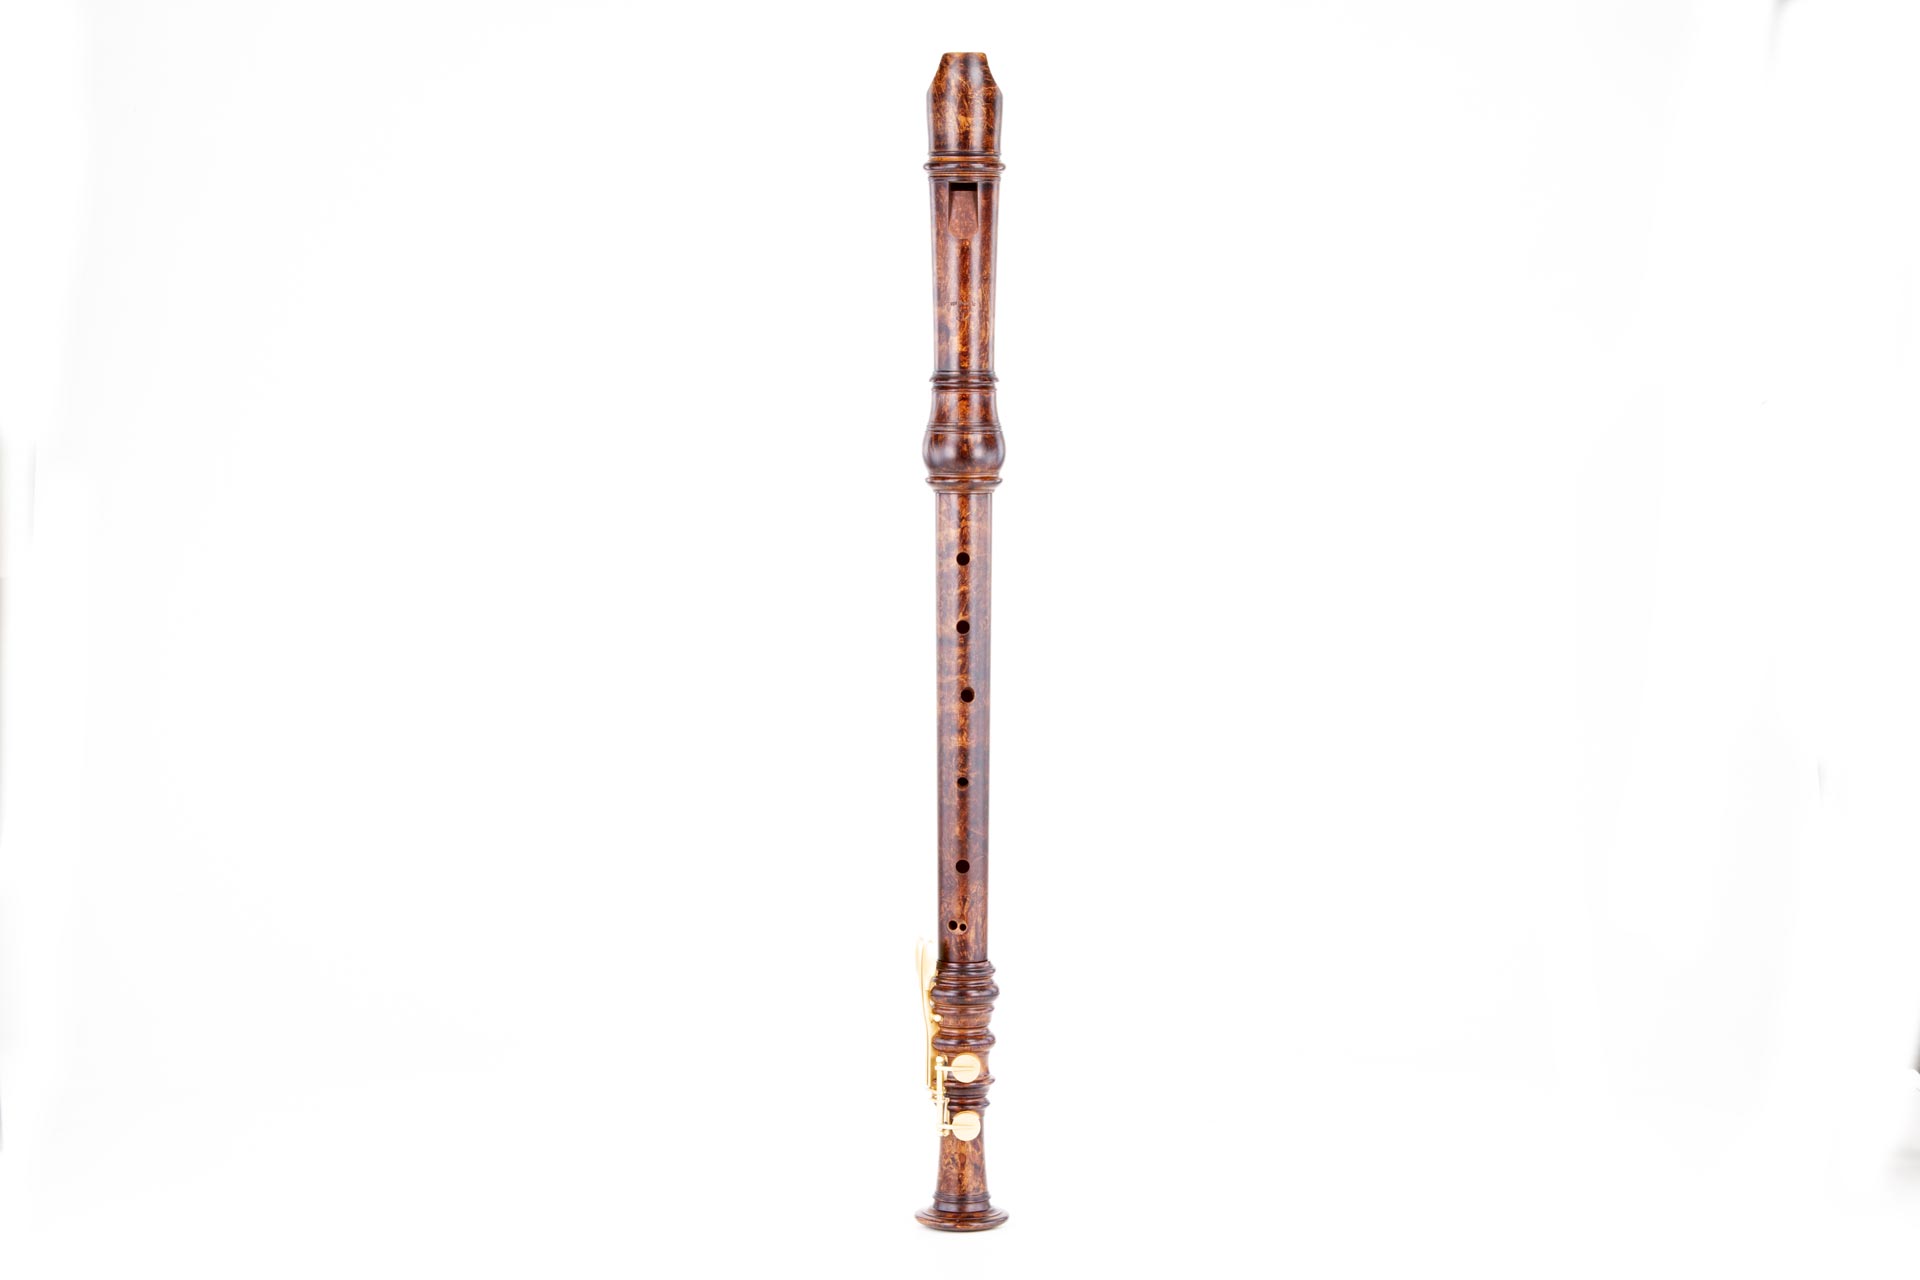 Moeck, "Hotteterre", tenor in c', baroque double hole, 442 Hz, boxwood antique stained